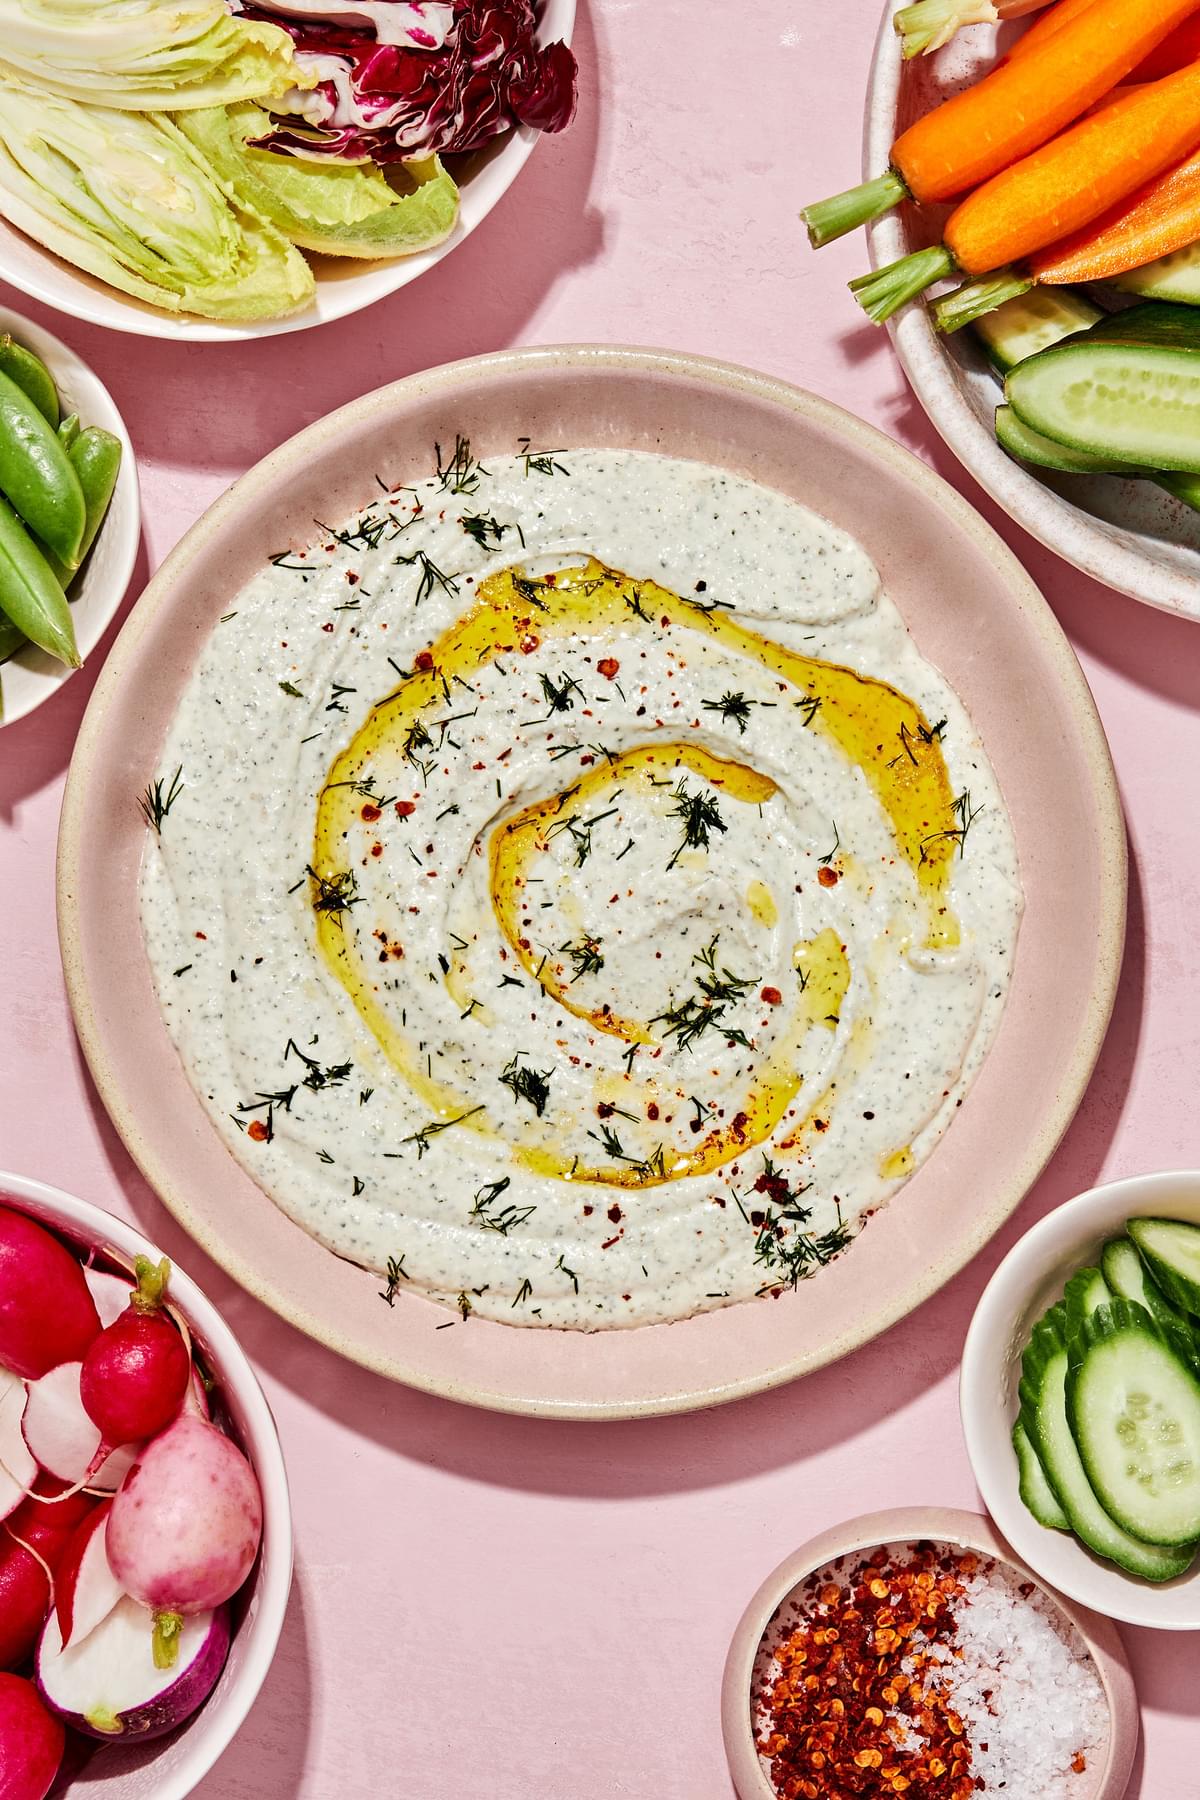 whipped feta dip made with feta, greek yogurt and spices in a serving bowl surrounded by raw vegetables for dipping